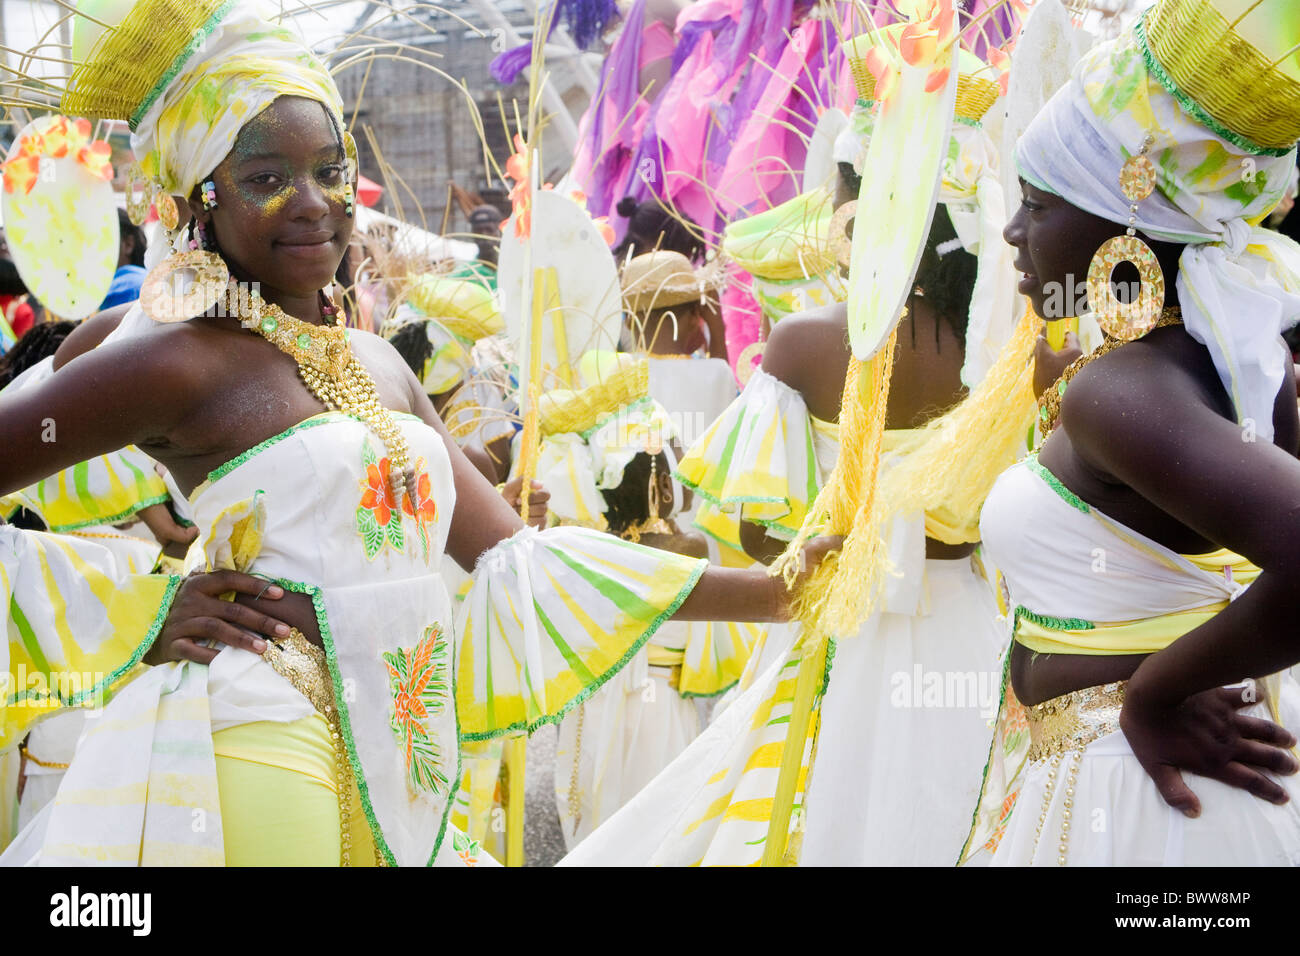 Trinidad Carnival - Two girls with hands on hips in floral white and yellow costume, baskets on their heads Stock Photo